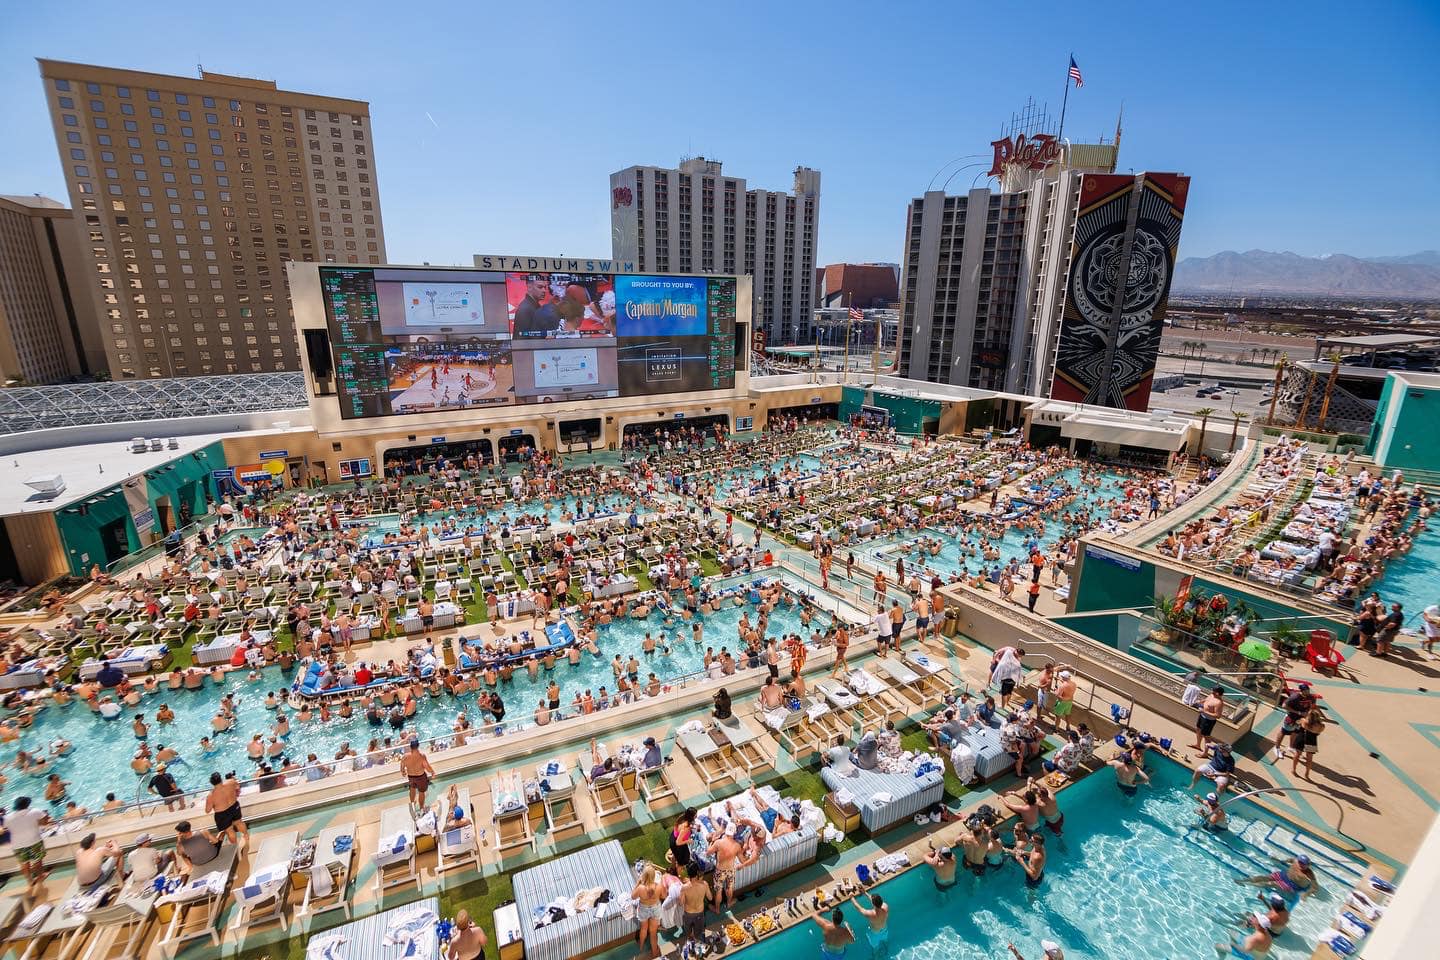 crowded pool party surrounded by las vegas buildings